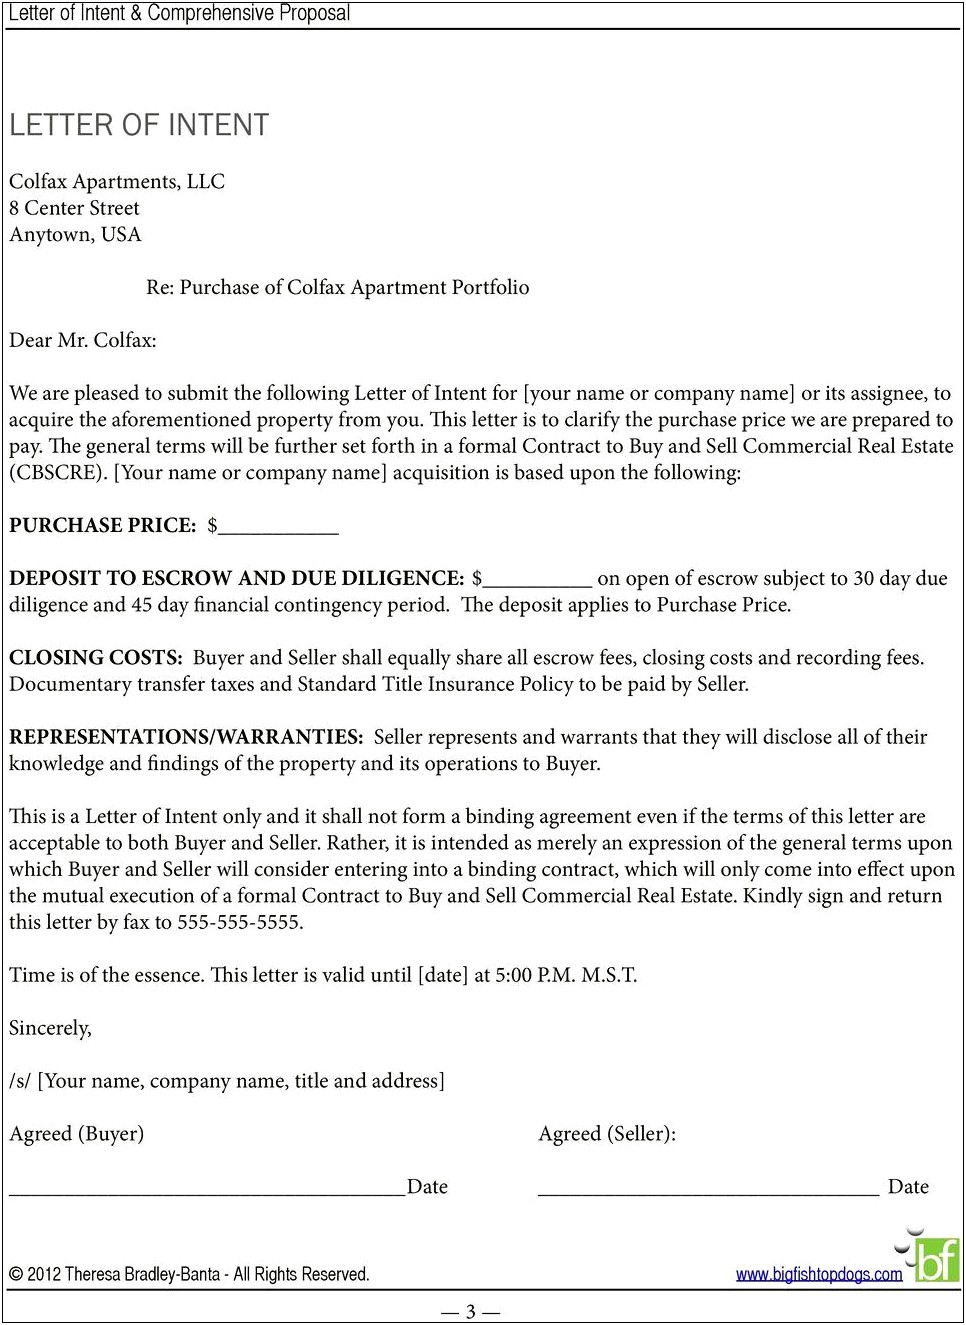 Free Template Land Development Letter Of Intent